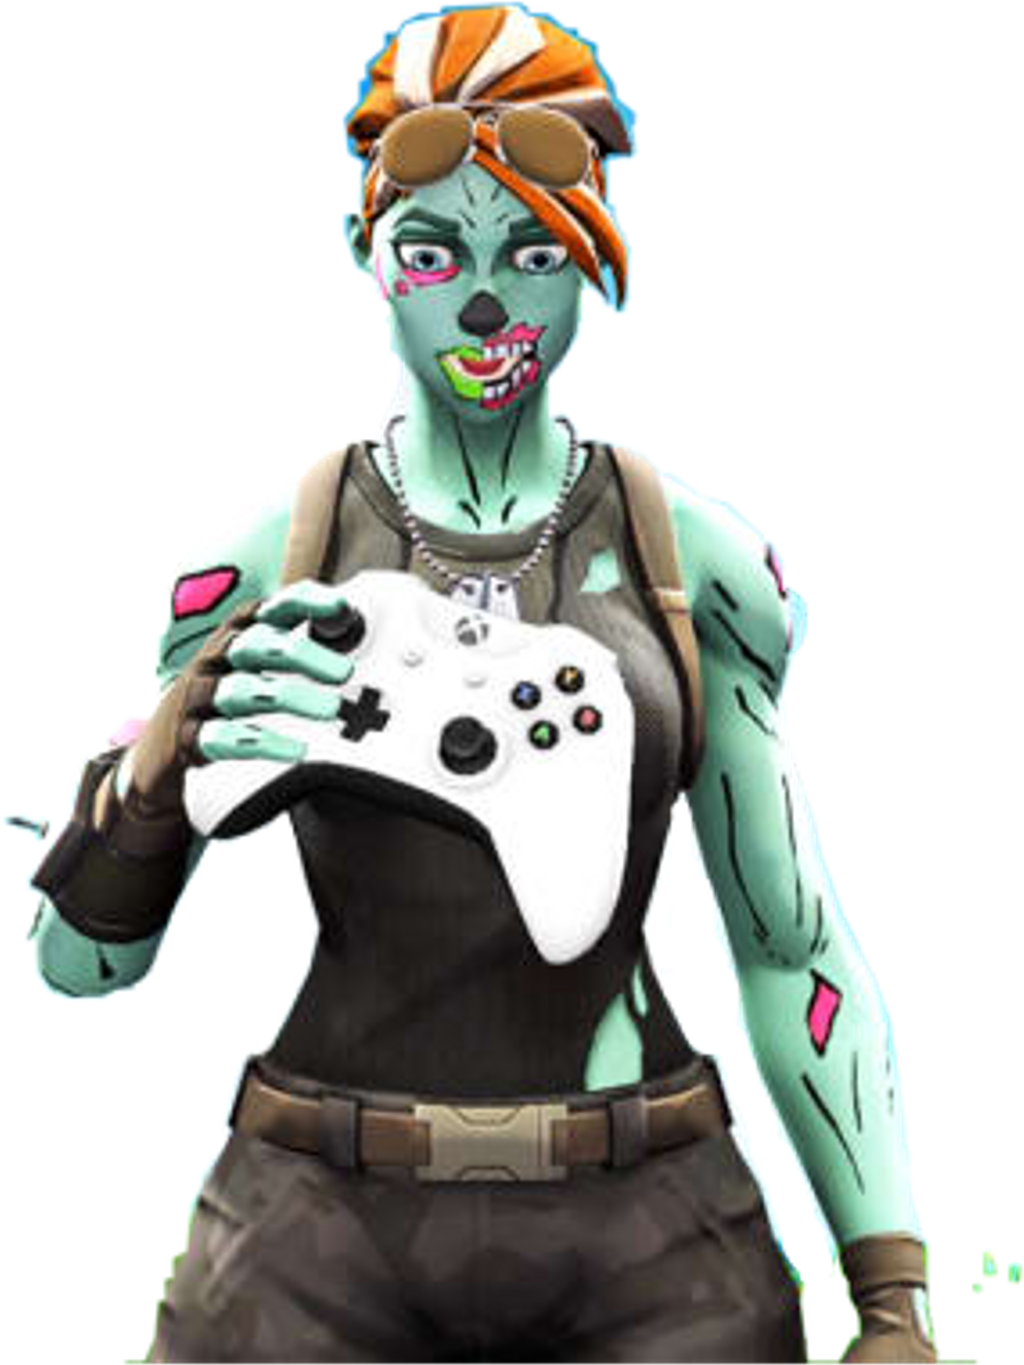 Xbox Controller Fortnite Wallpapers - Wallpaper Cave - 1024 x 1365 png 871kB